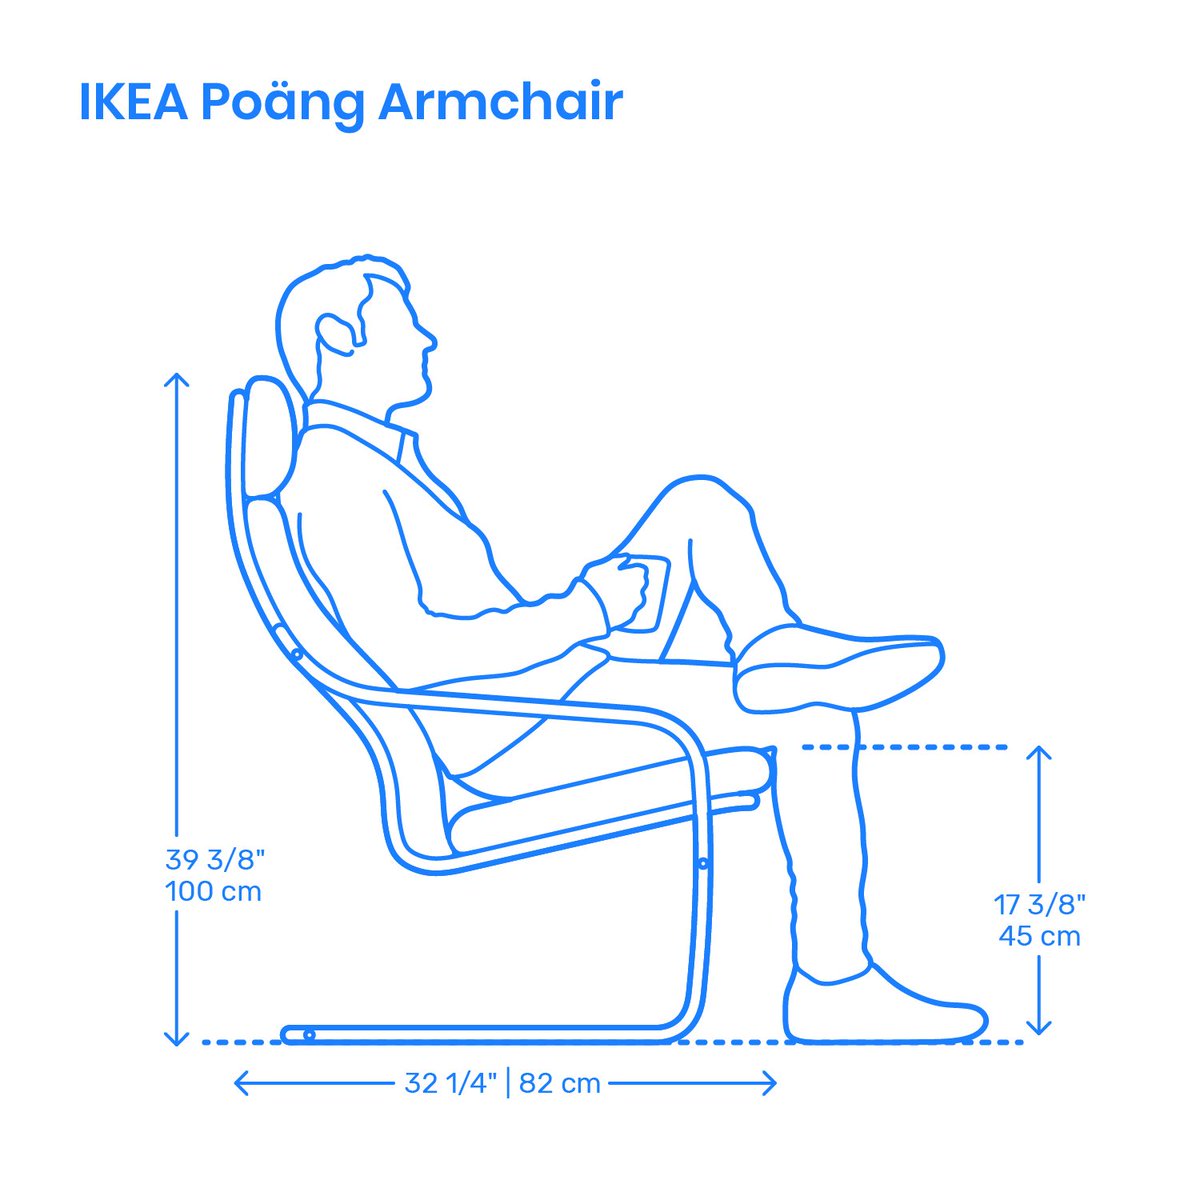 Dimensions Guide On Twitter Furniture The Ikea Poang Armchair